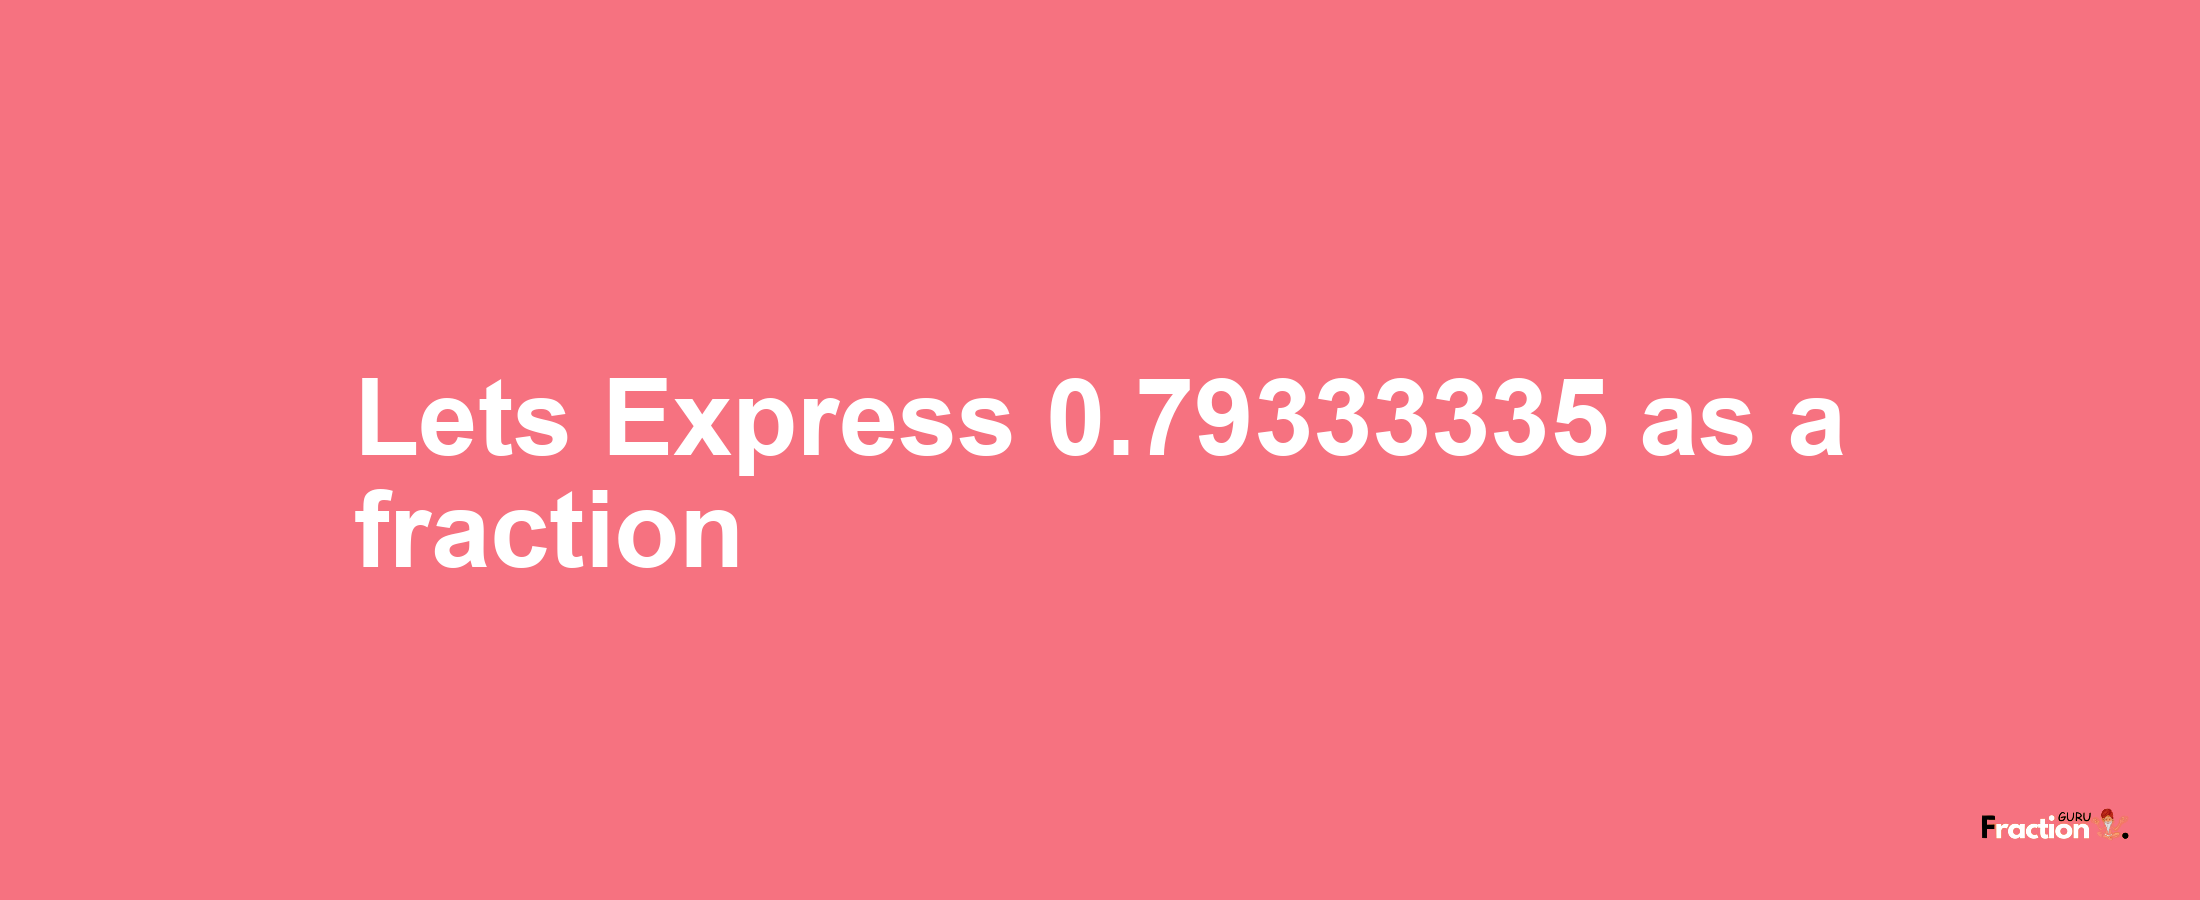 Lets Express 0.79333335 as afraction